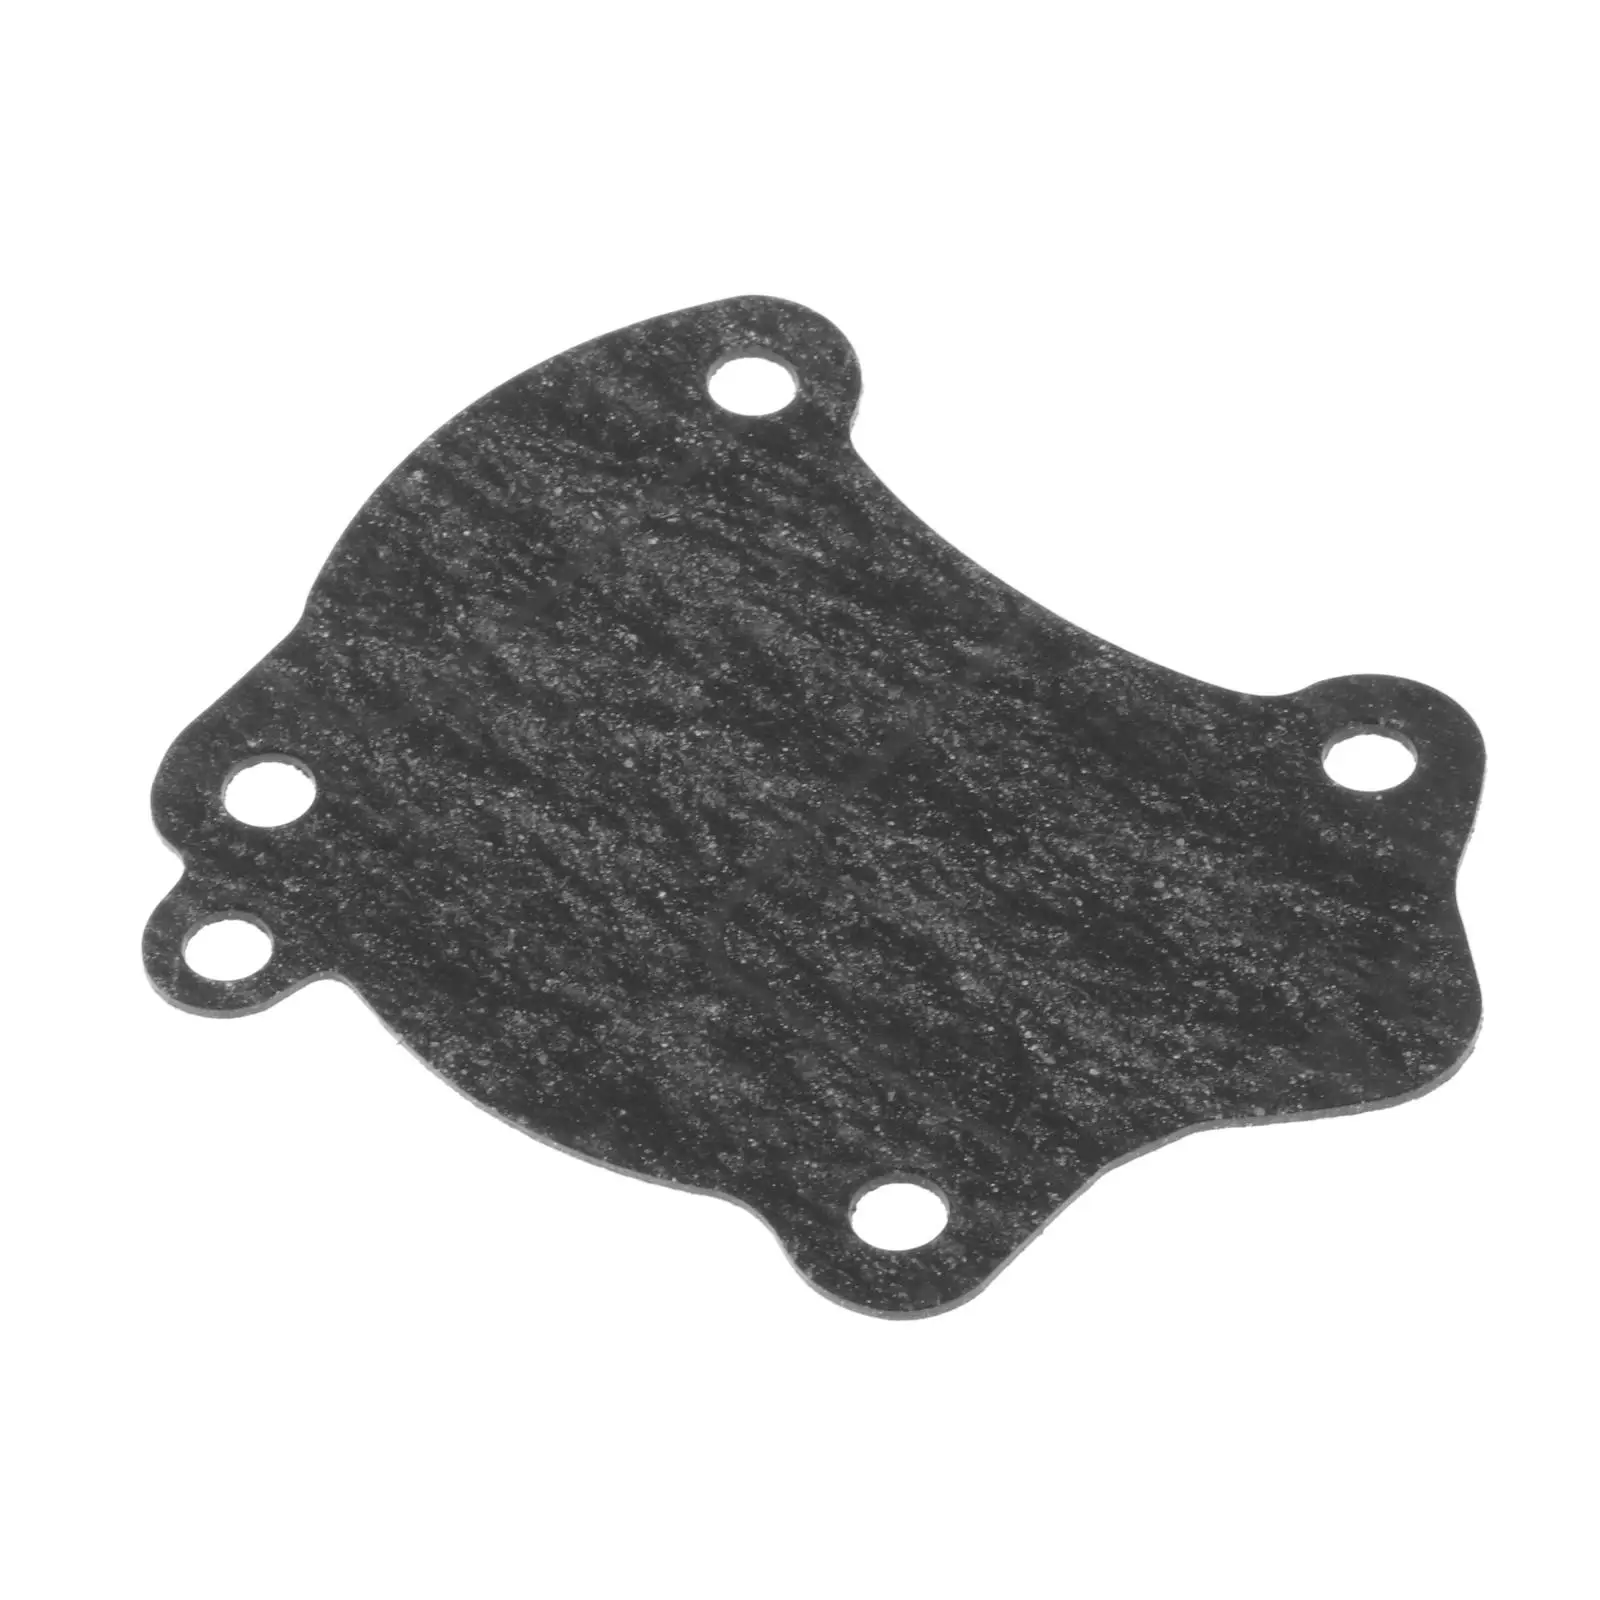 Head Cover Gasket Spare Parts Compatible with Yamaha Outboard 4 hp 2 stroke